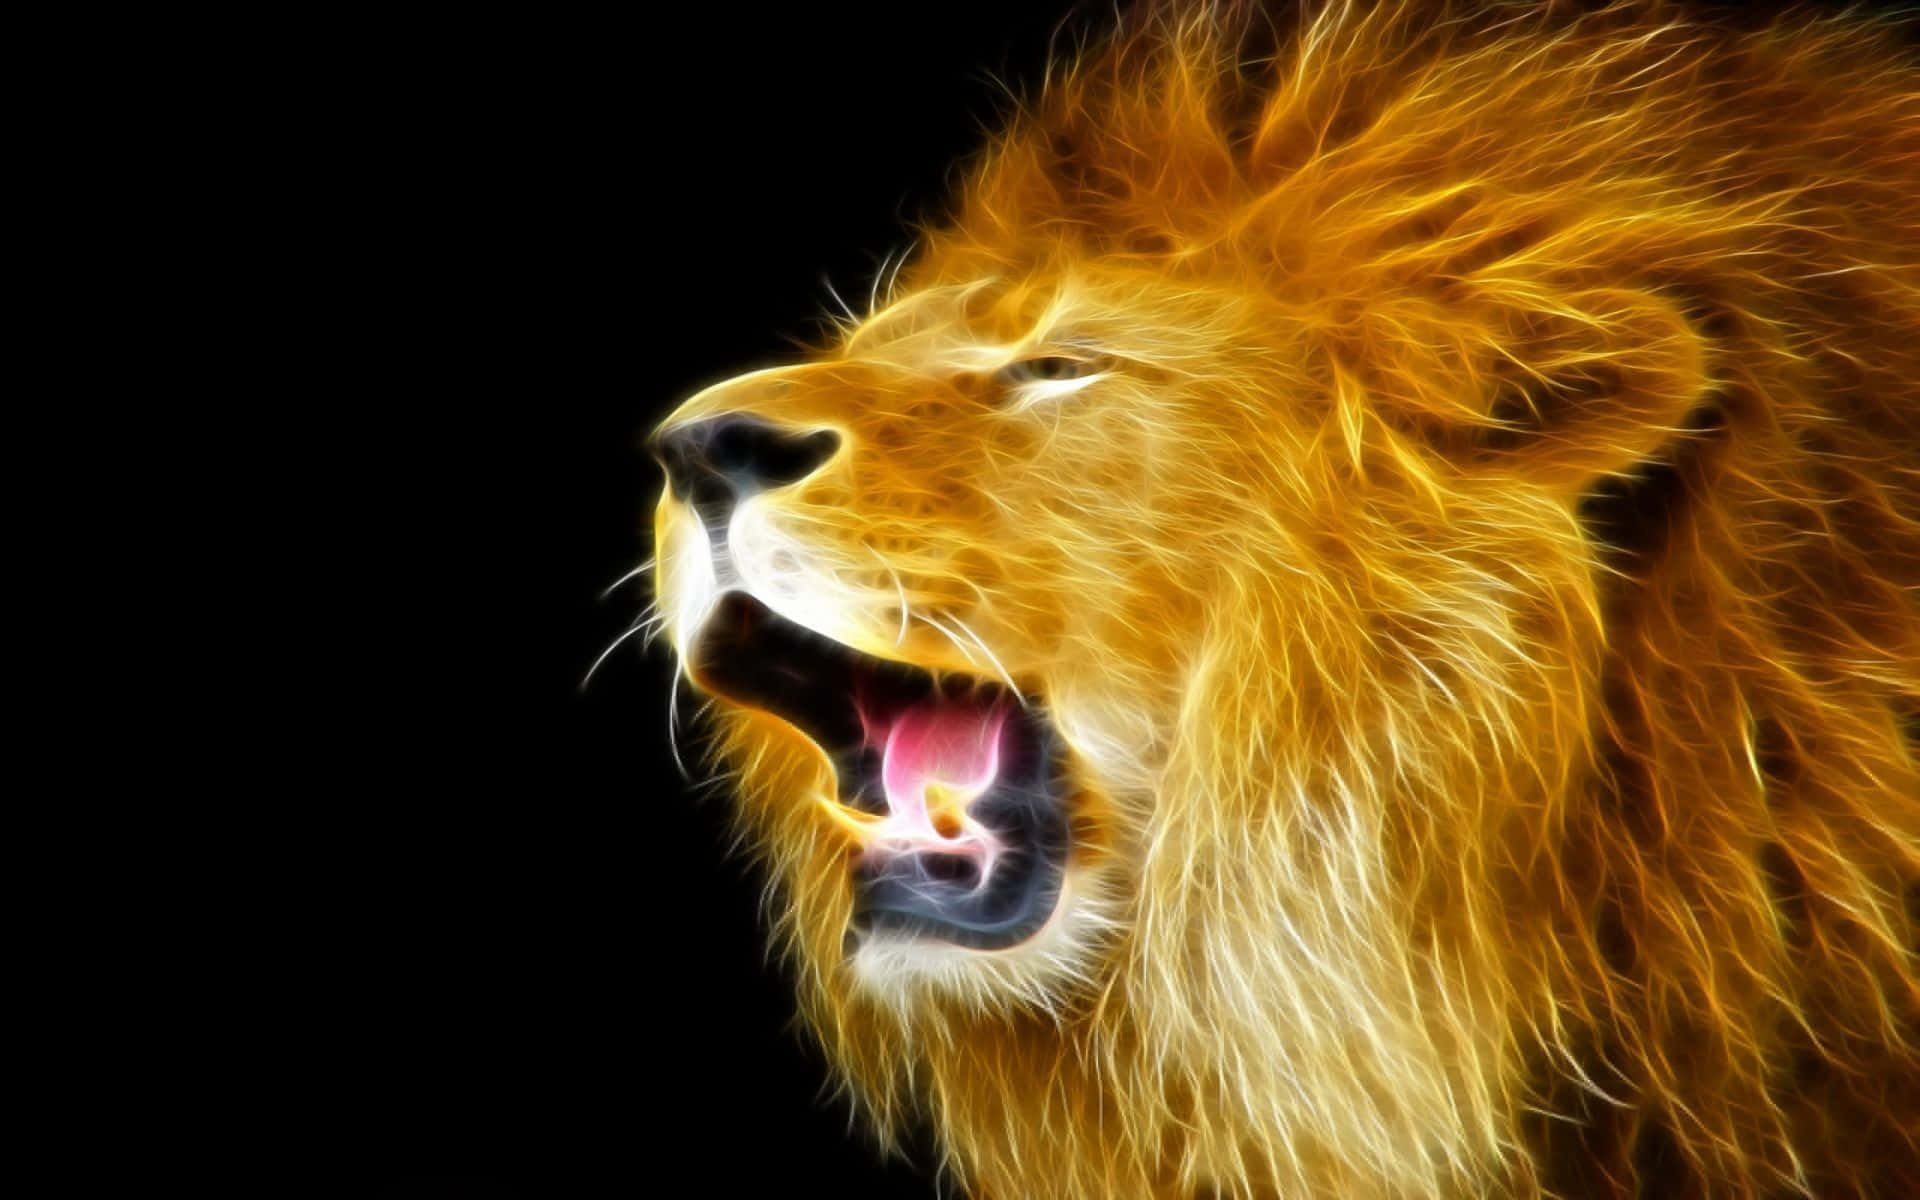 The majestically powerful Abstract Lion stands tall against a vibrant background Wallpaper